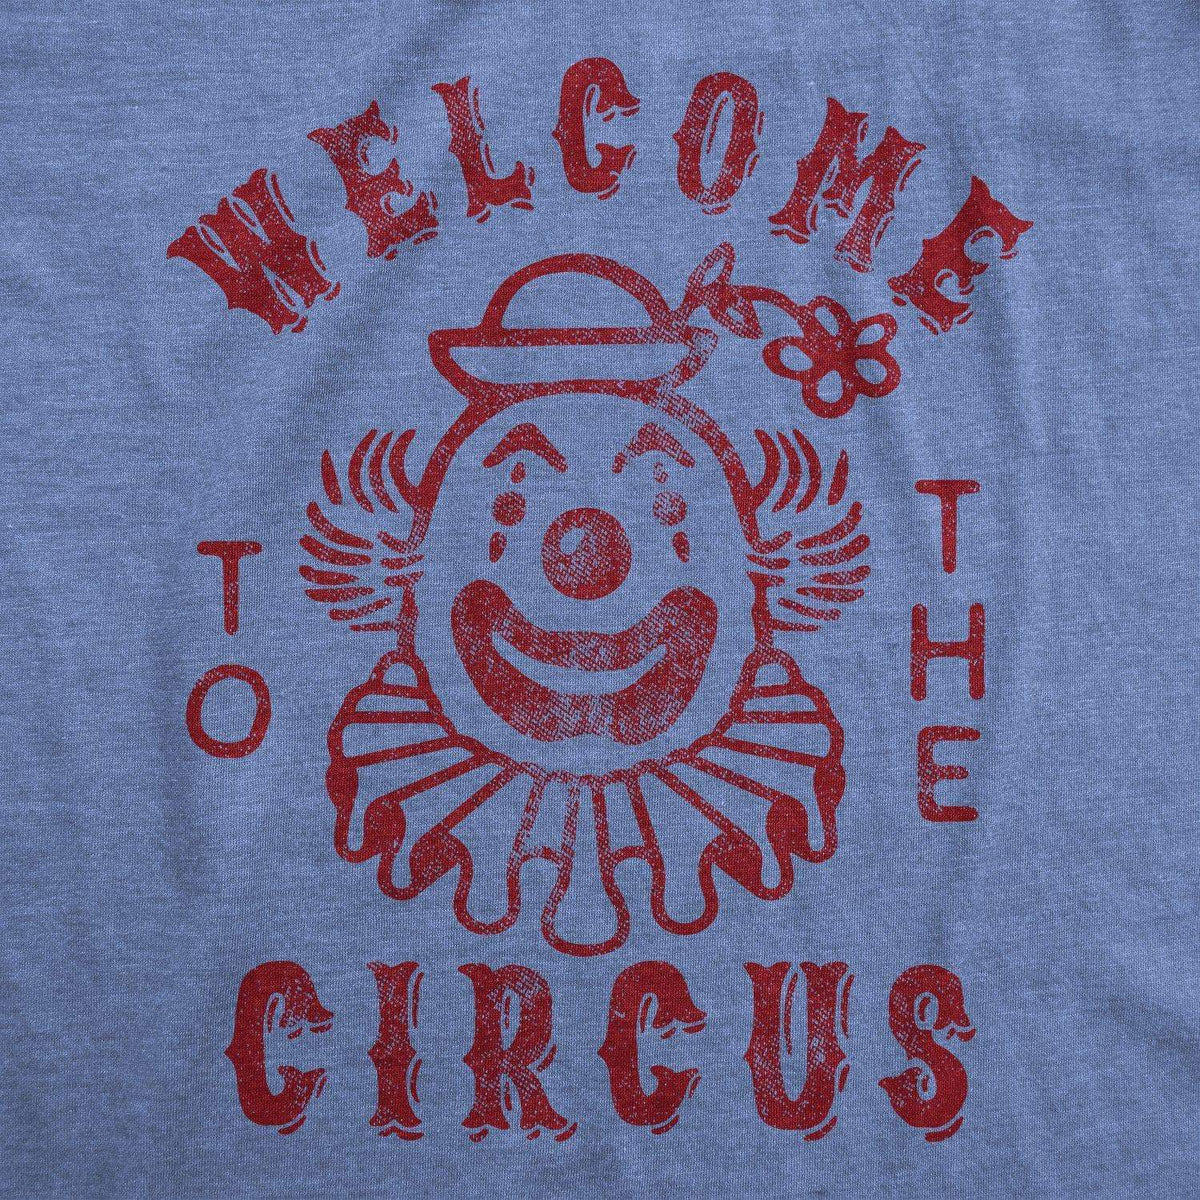 Welcome To The Circus Men&#39;s Tshirt - Crazy Dog T-Shirts